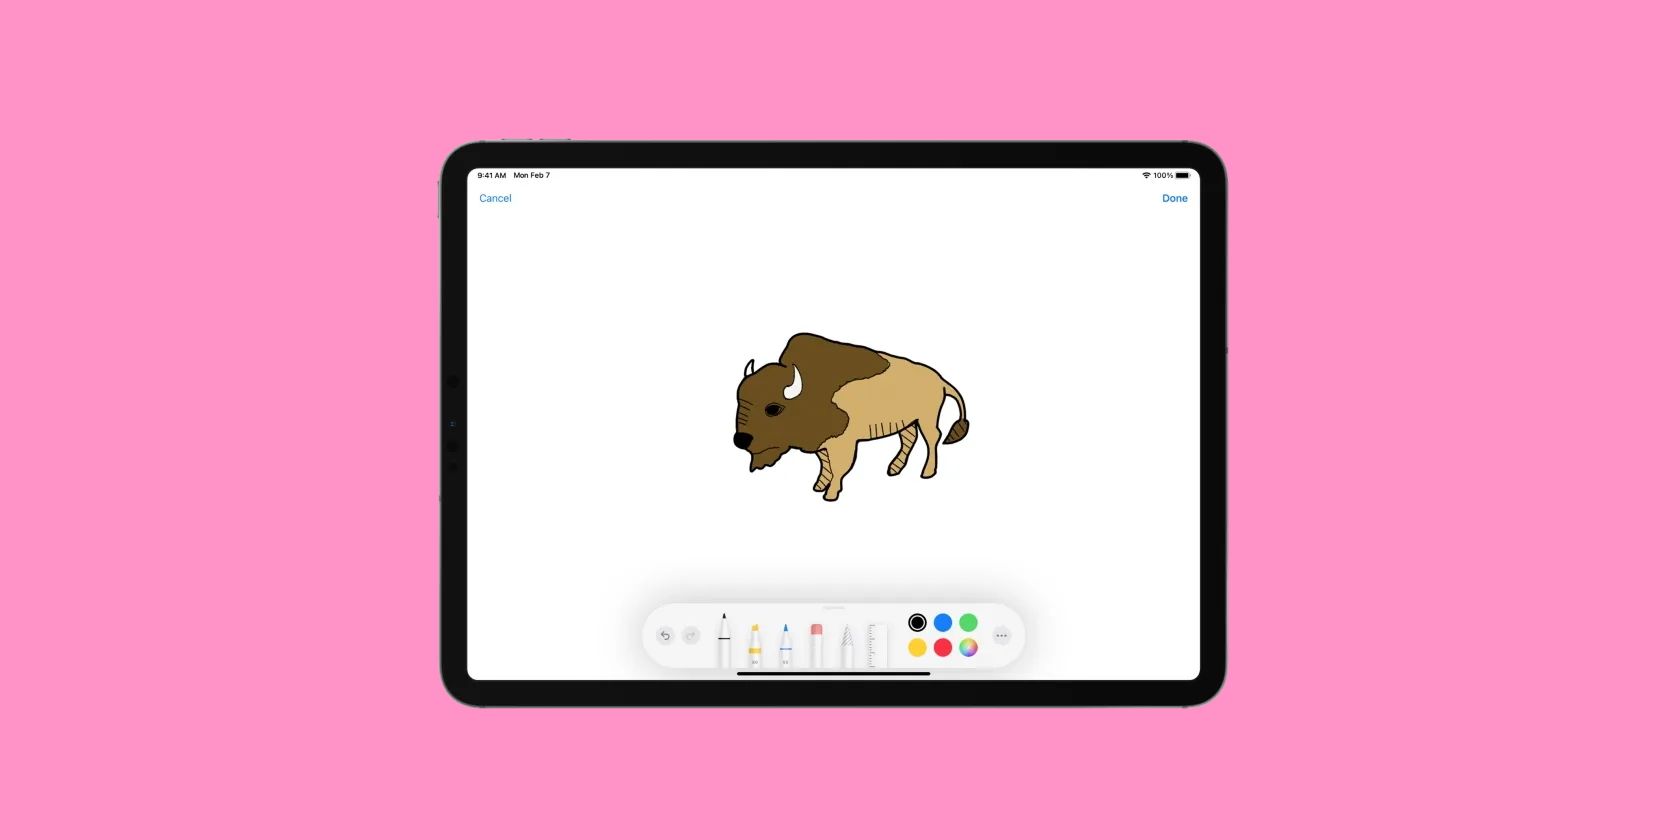 How to Insert Sketches and Mark Up Documents on Your Mac With an iPhone or iPad